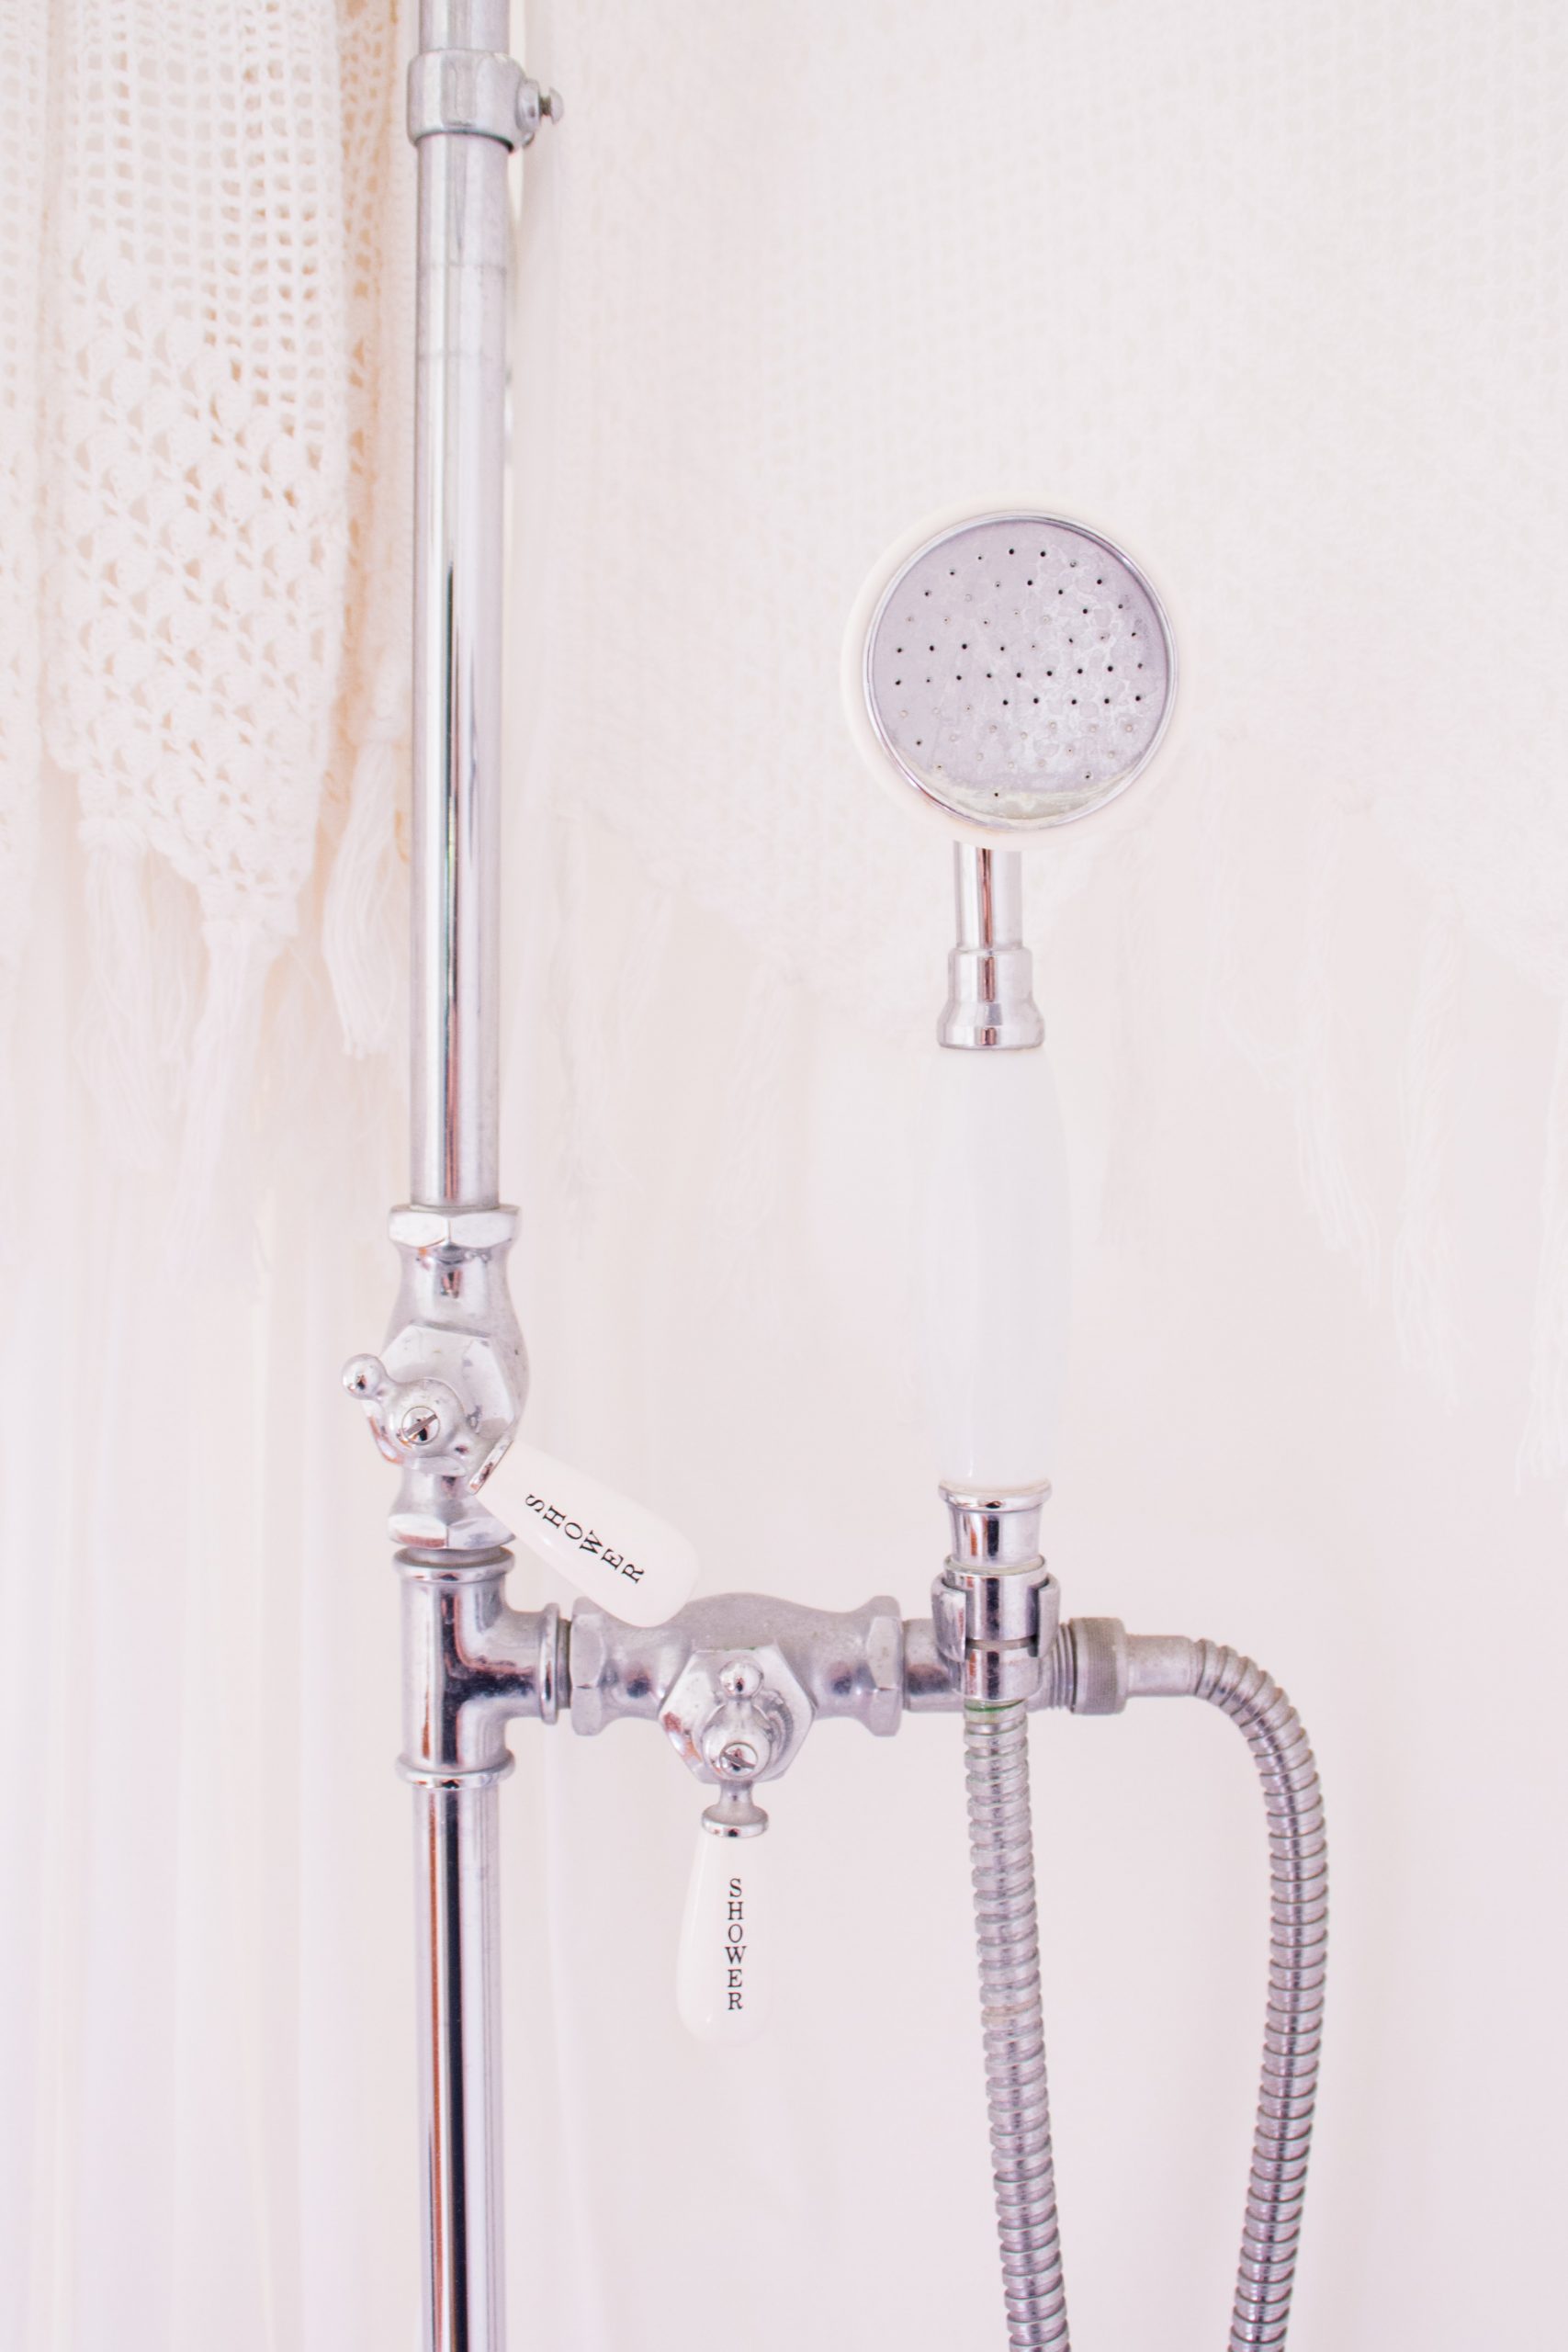 Exposed chrome plumbing pipes in shower with detachable showerheat